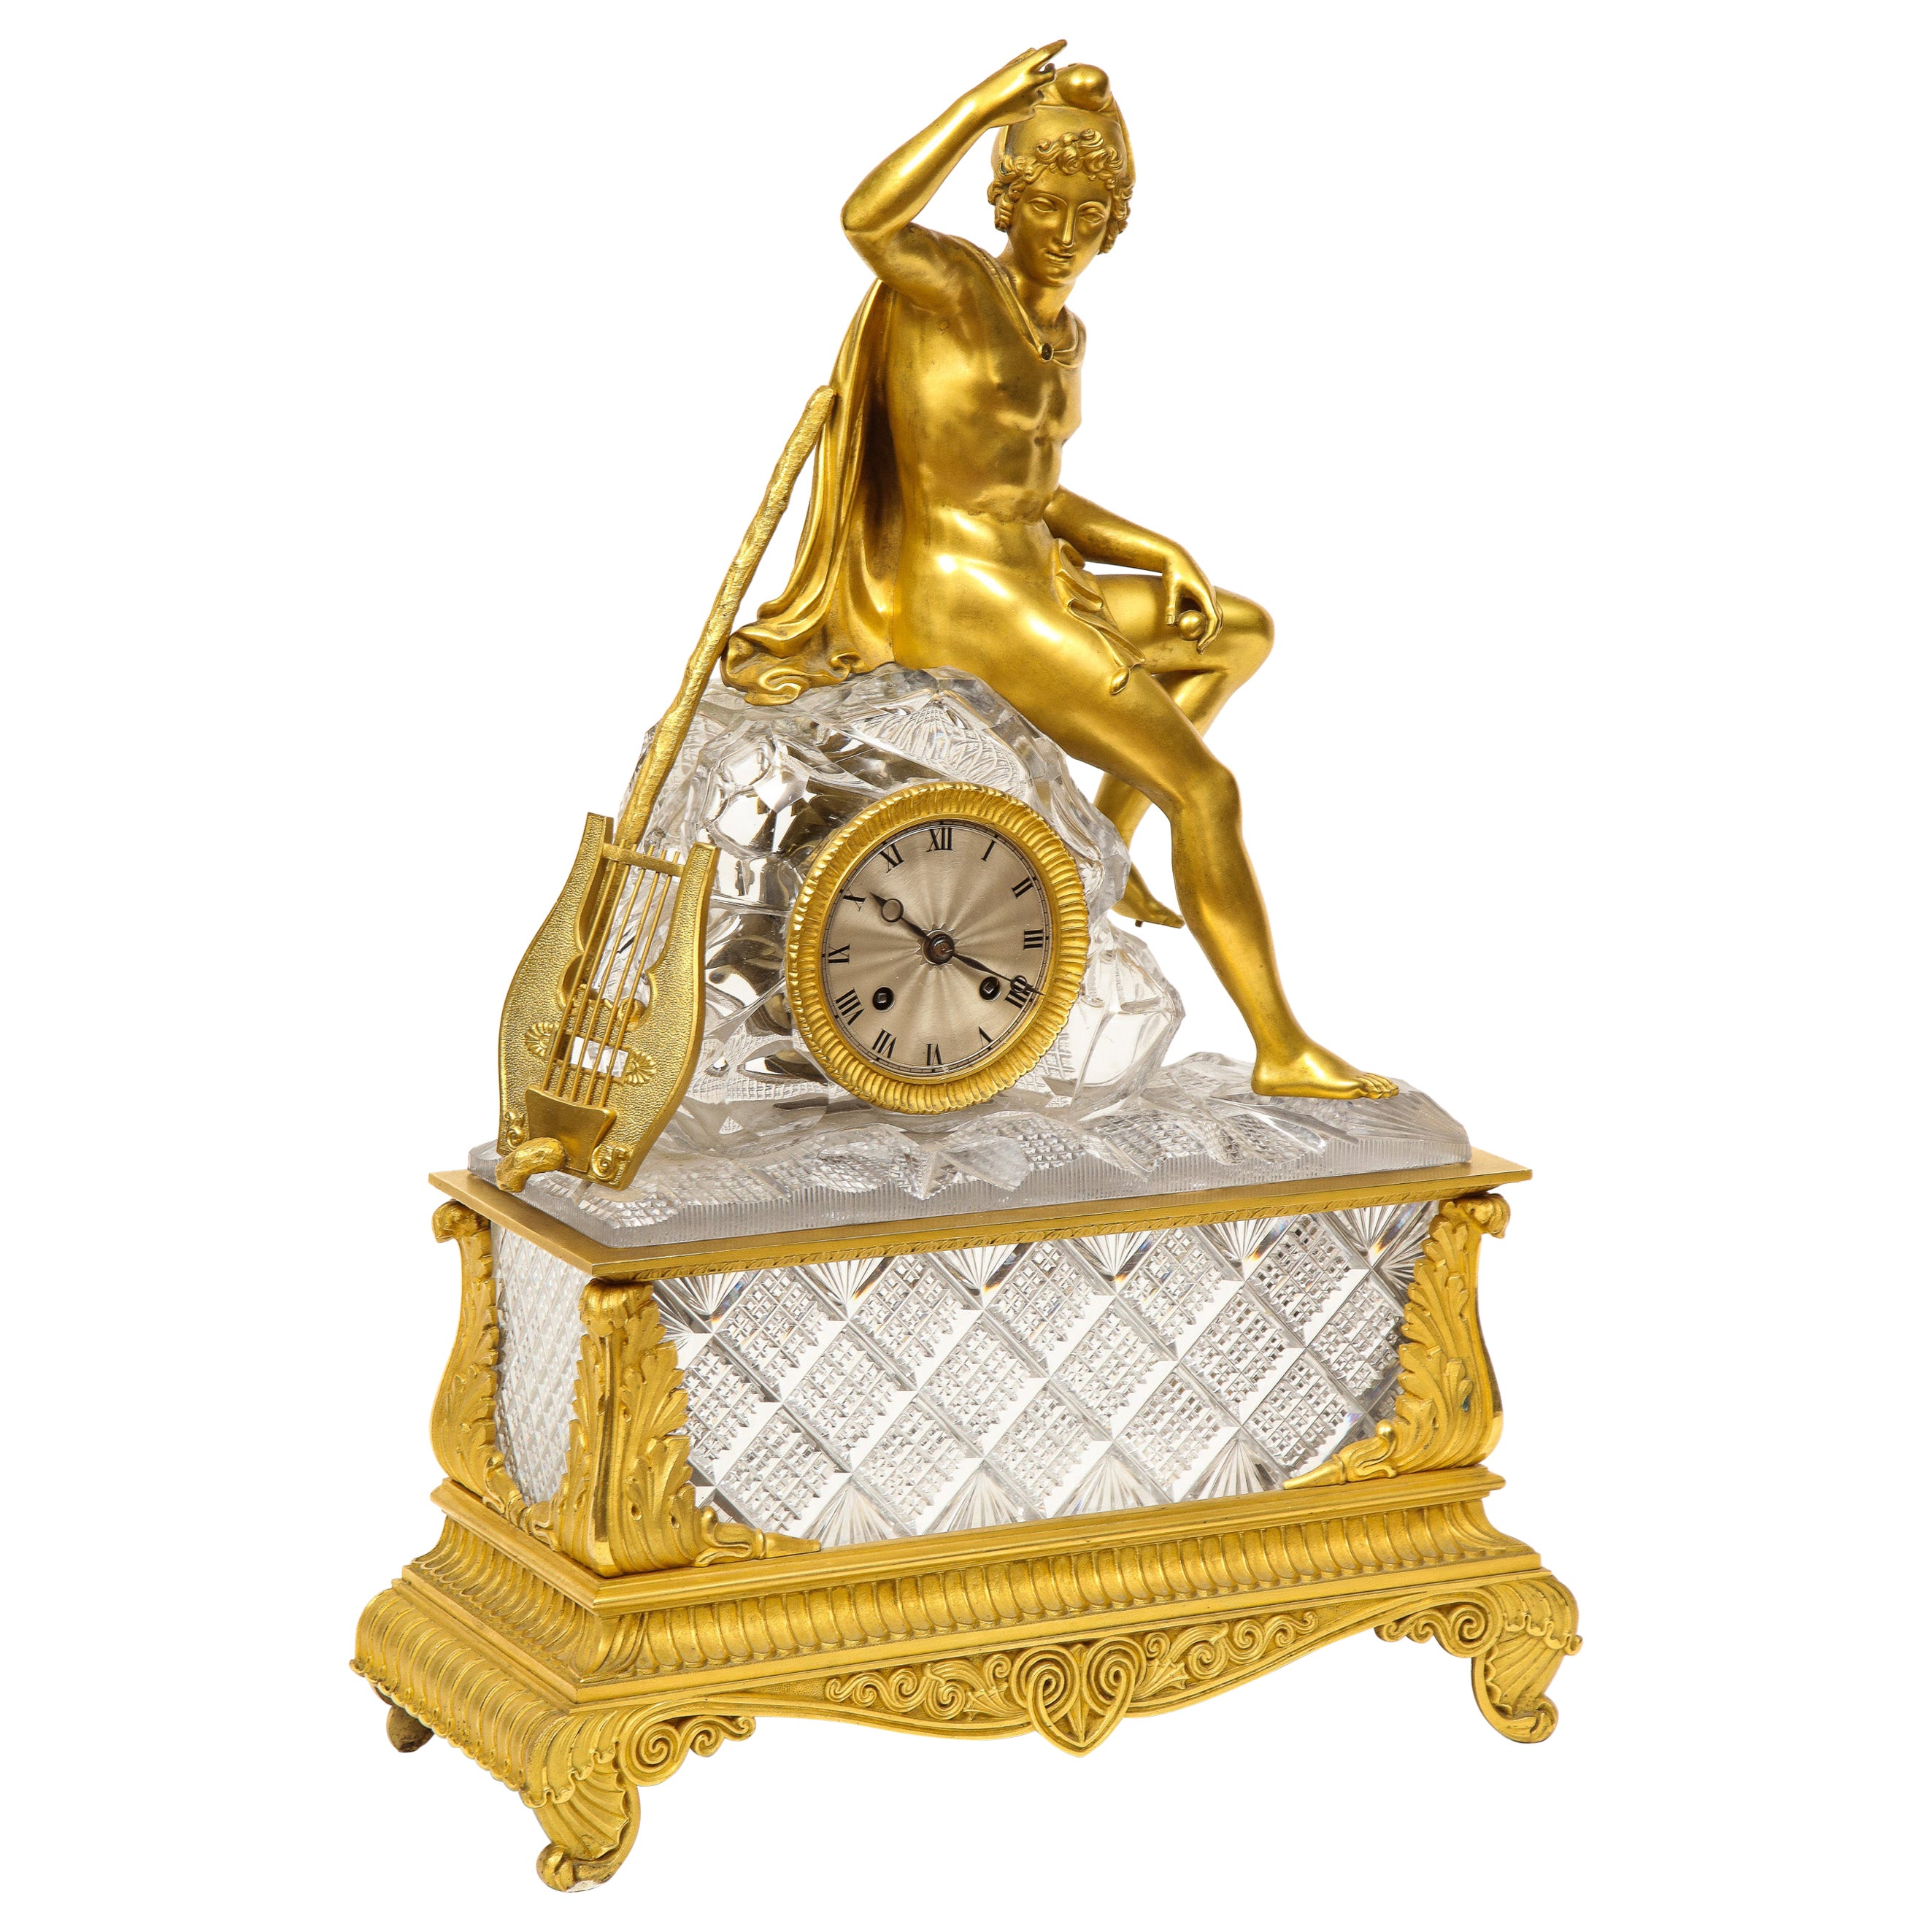 Exquisite French Empire Ormolu and Cut-Crystal Clock, c. 1815 For Sale